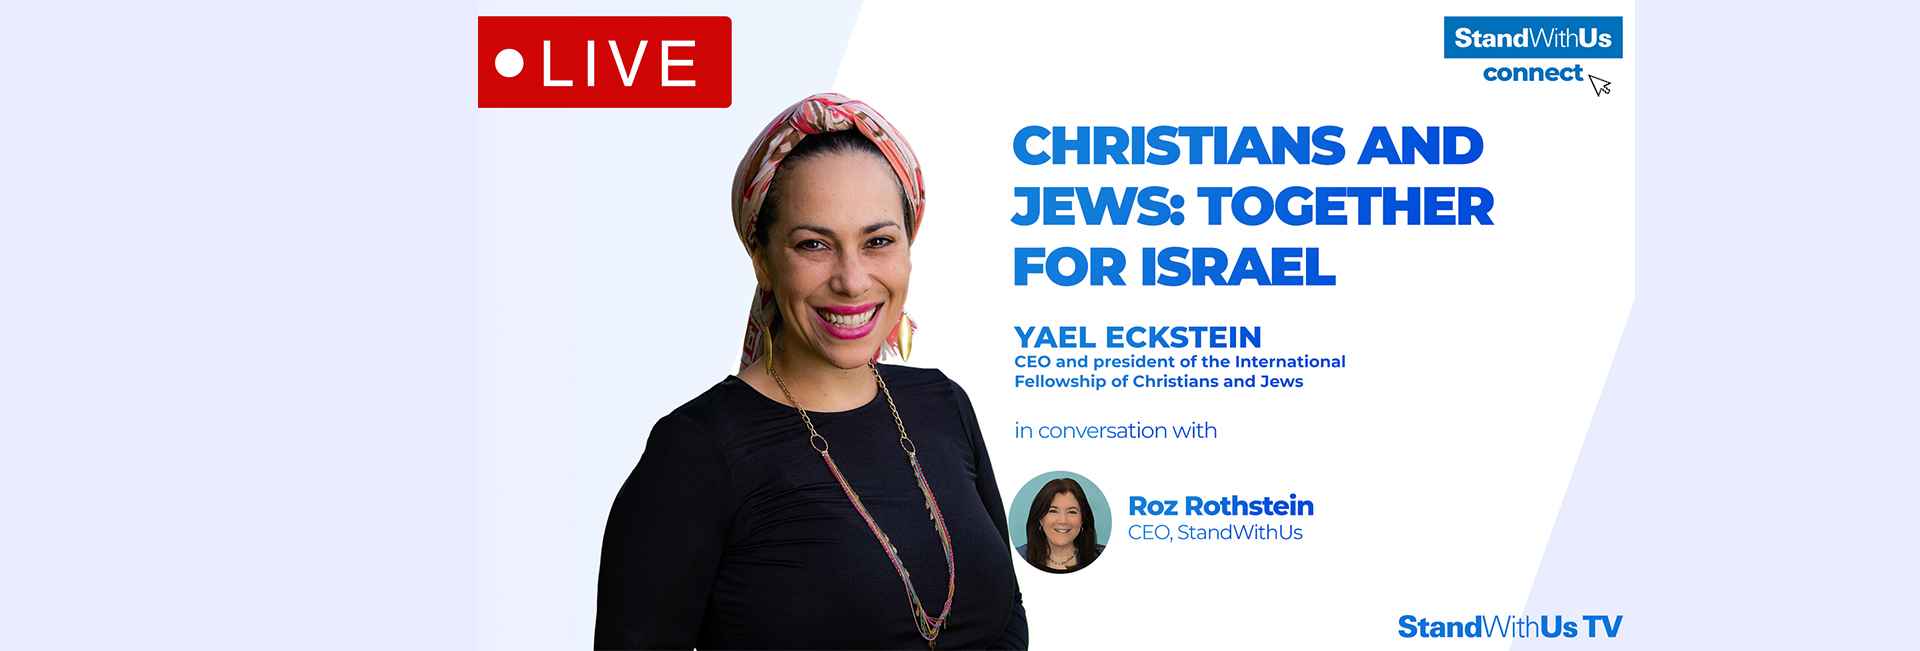 Christians and Jews: Together For Israel